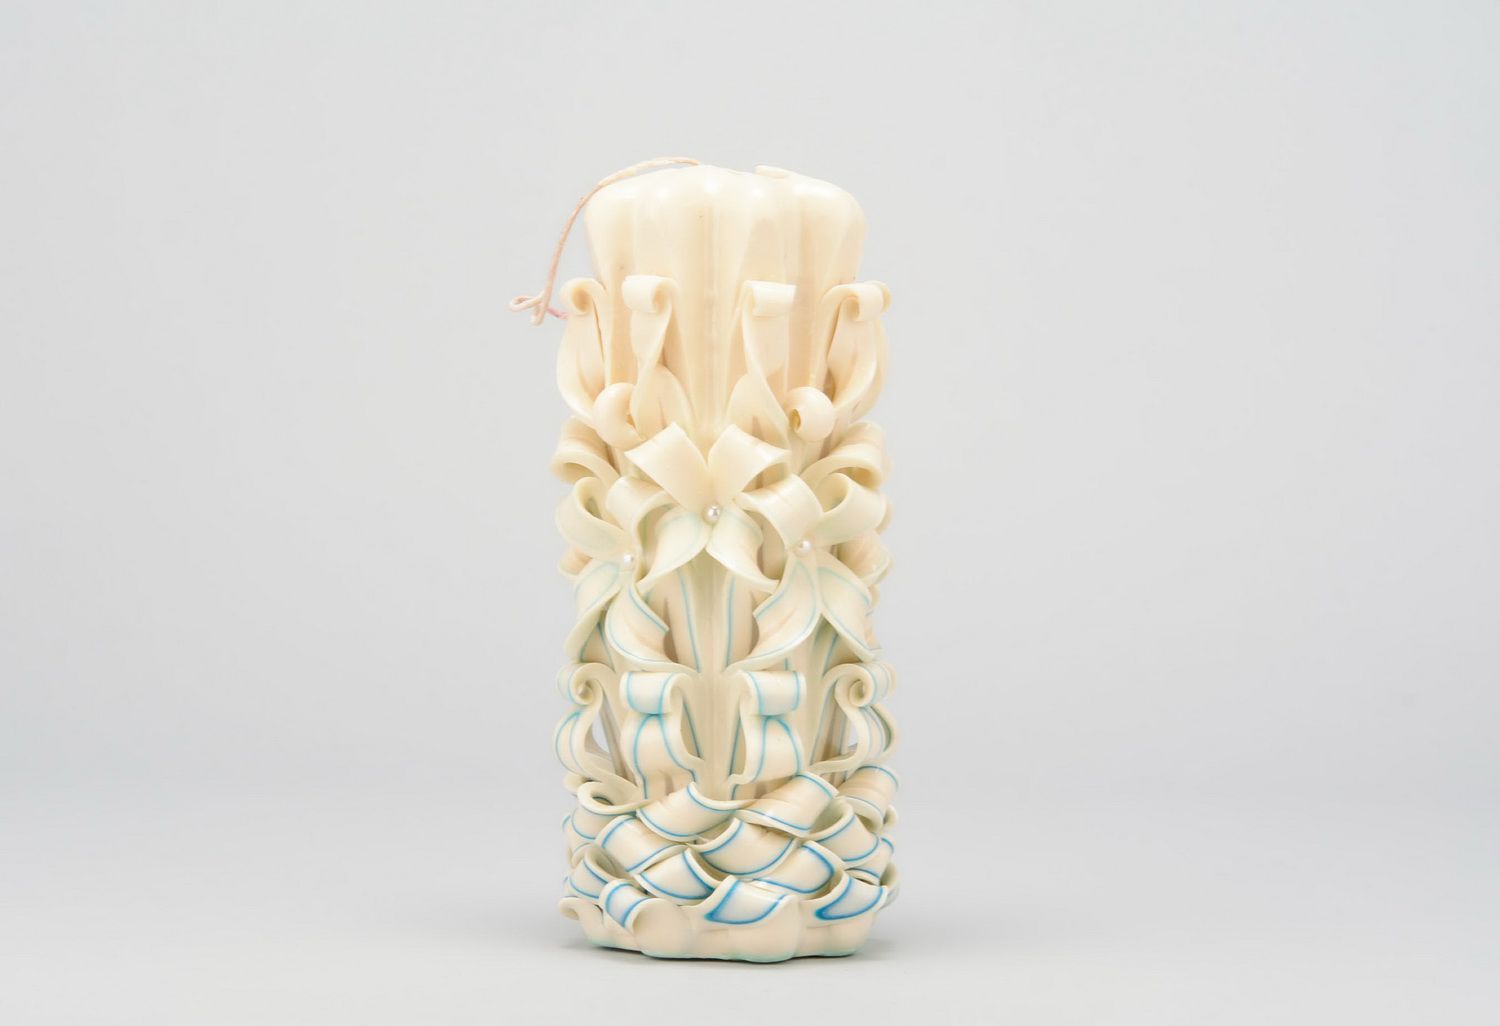 Carved paraffin wax candle photo 2